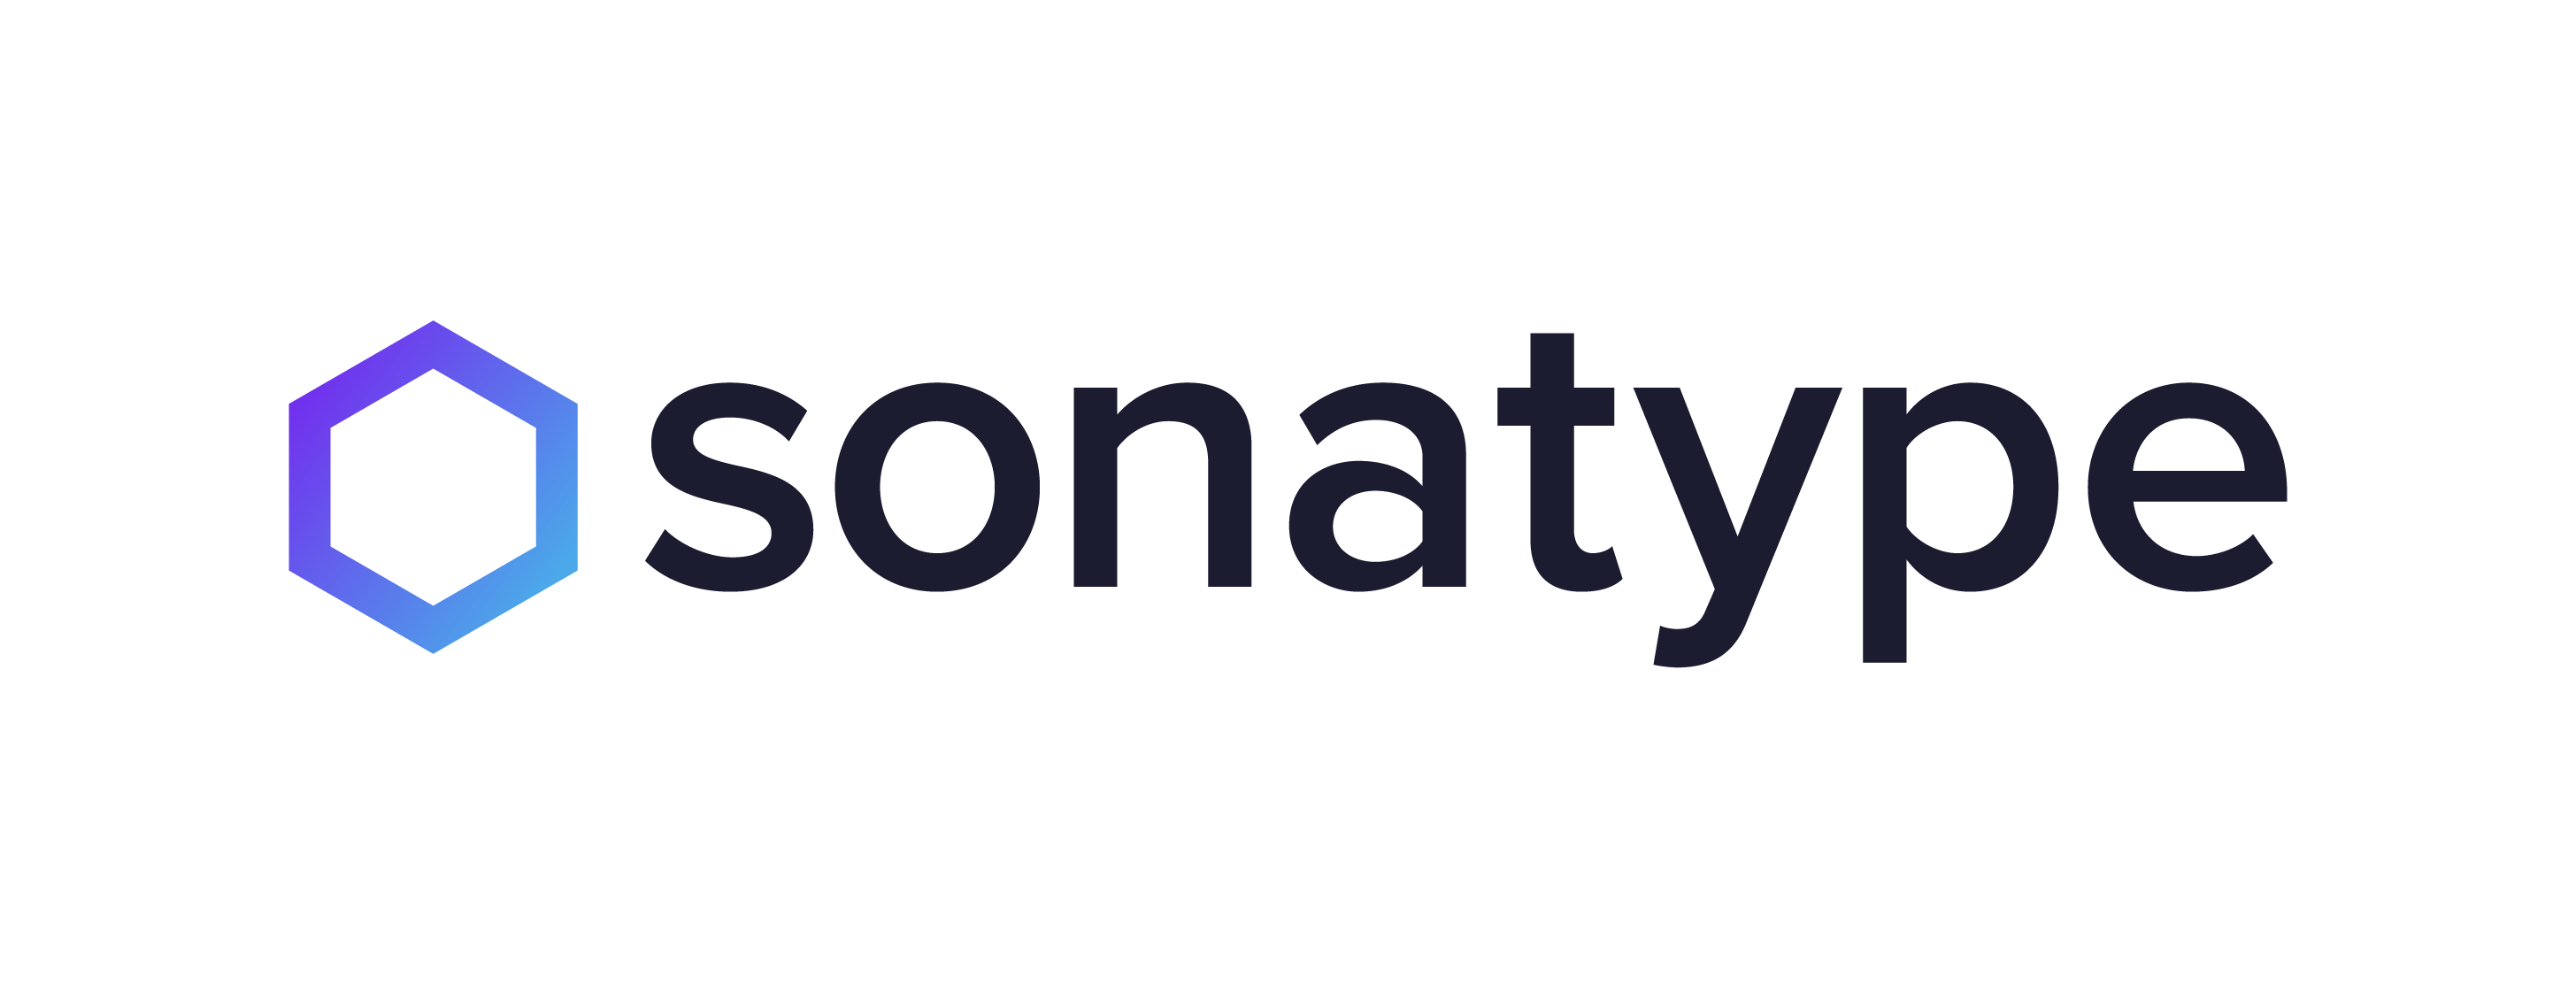 Happening Now! March Office Hours - News - Sonatype Community